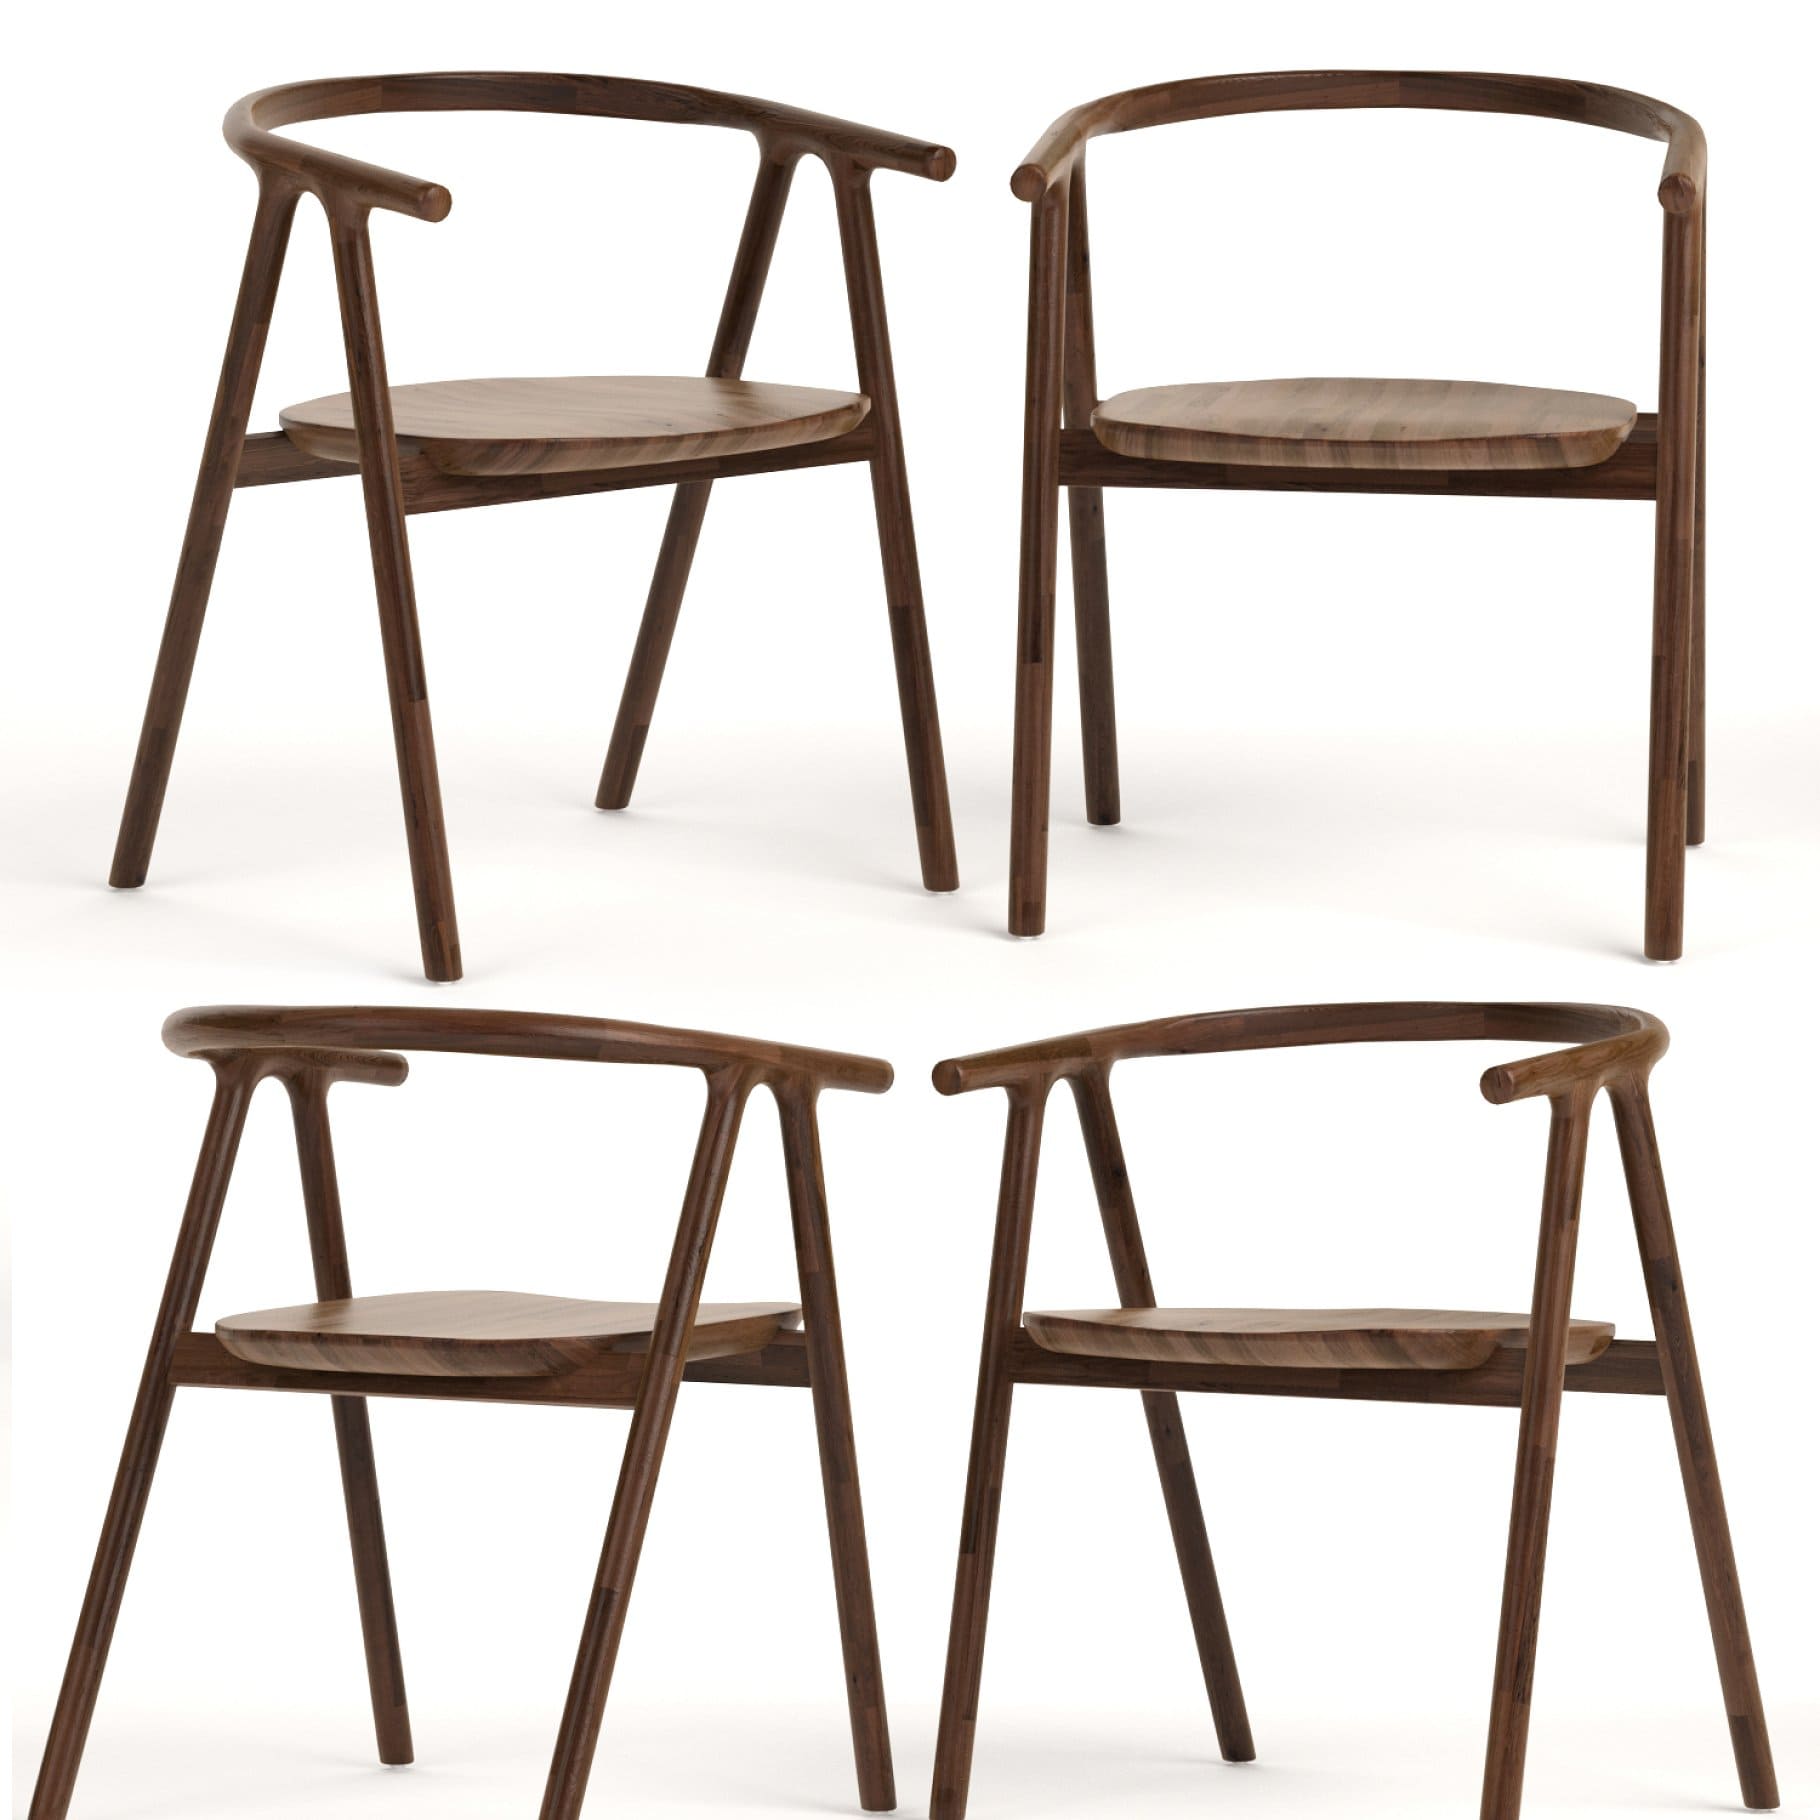 Thin wooden legs Tanaka Dining Chair Industry West.